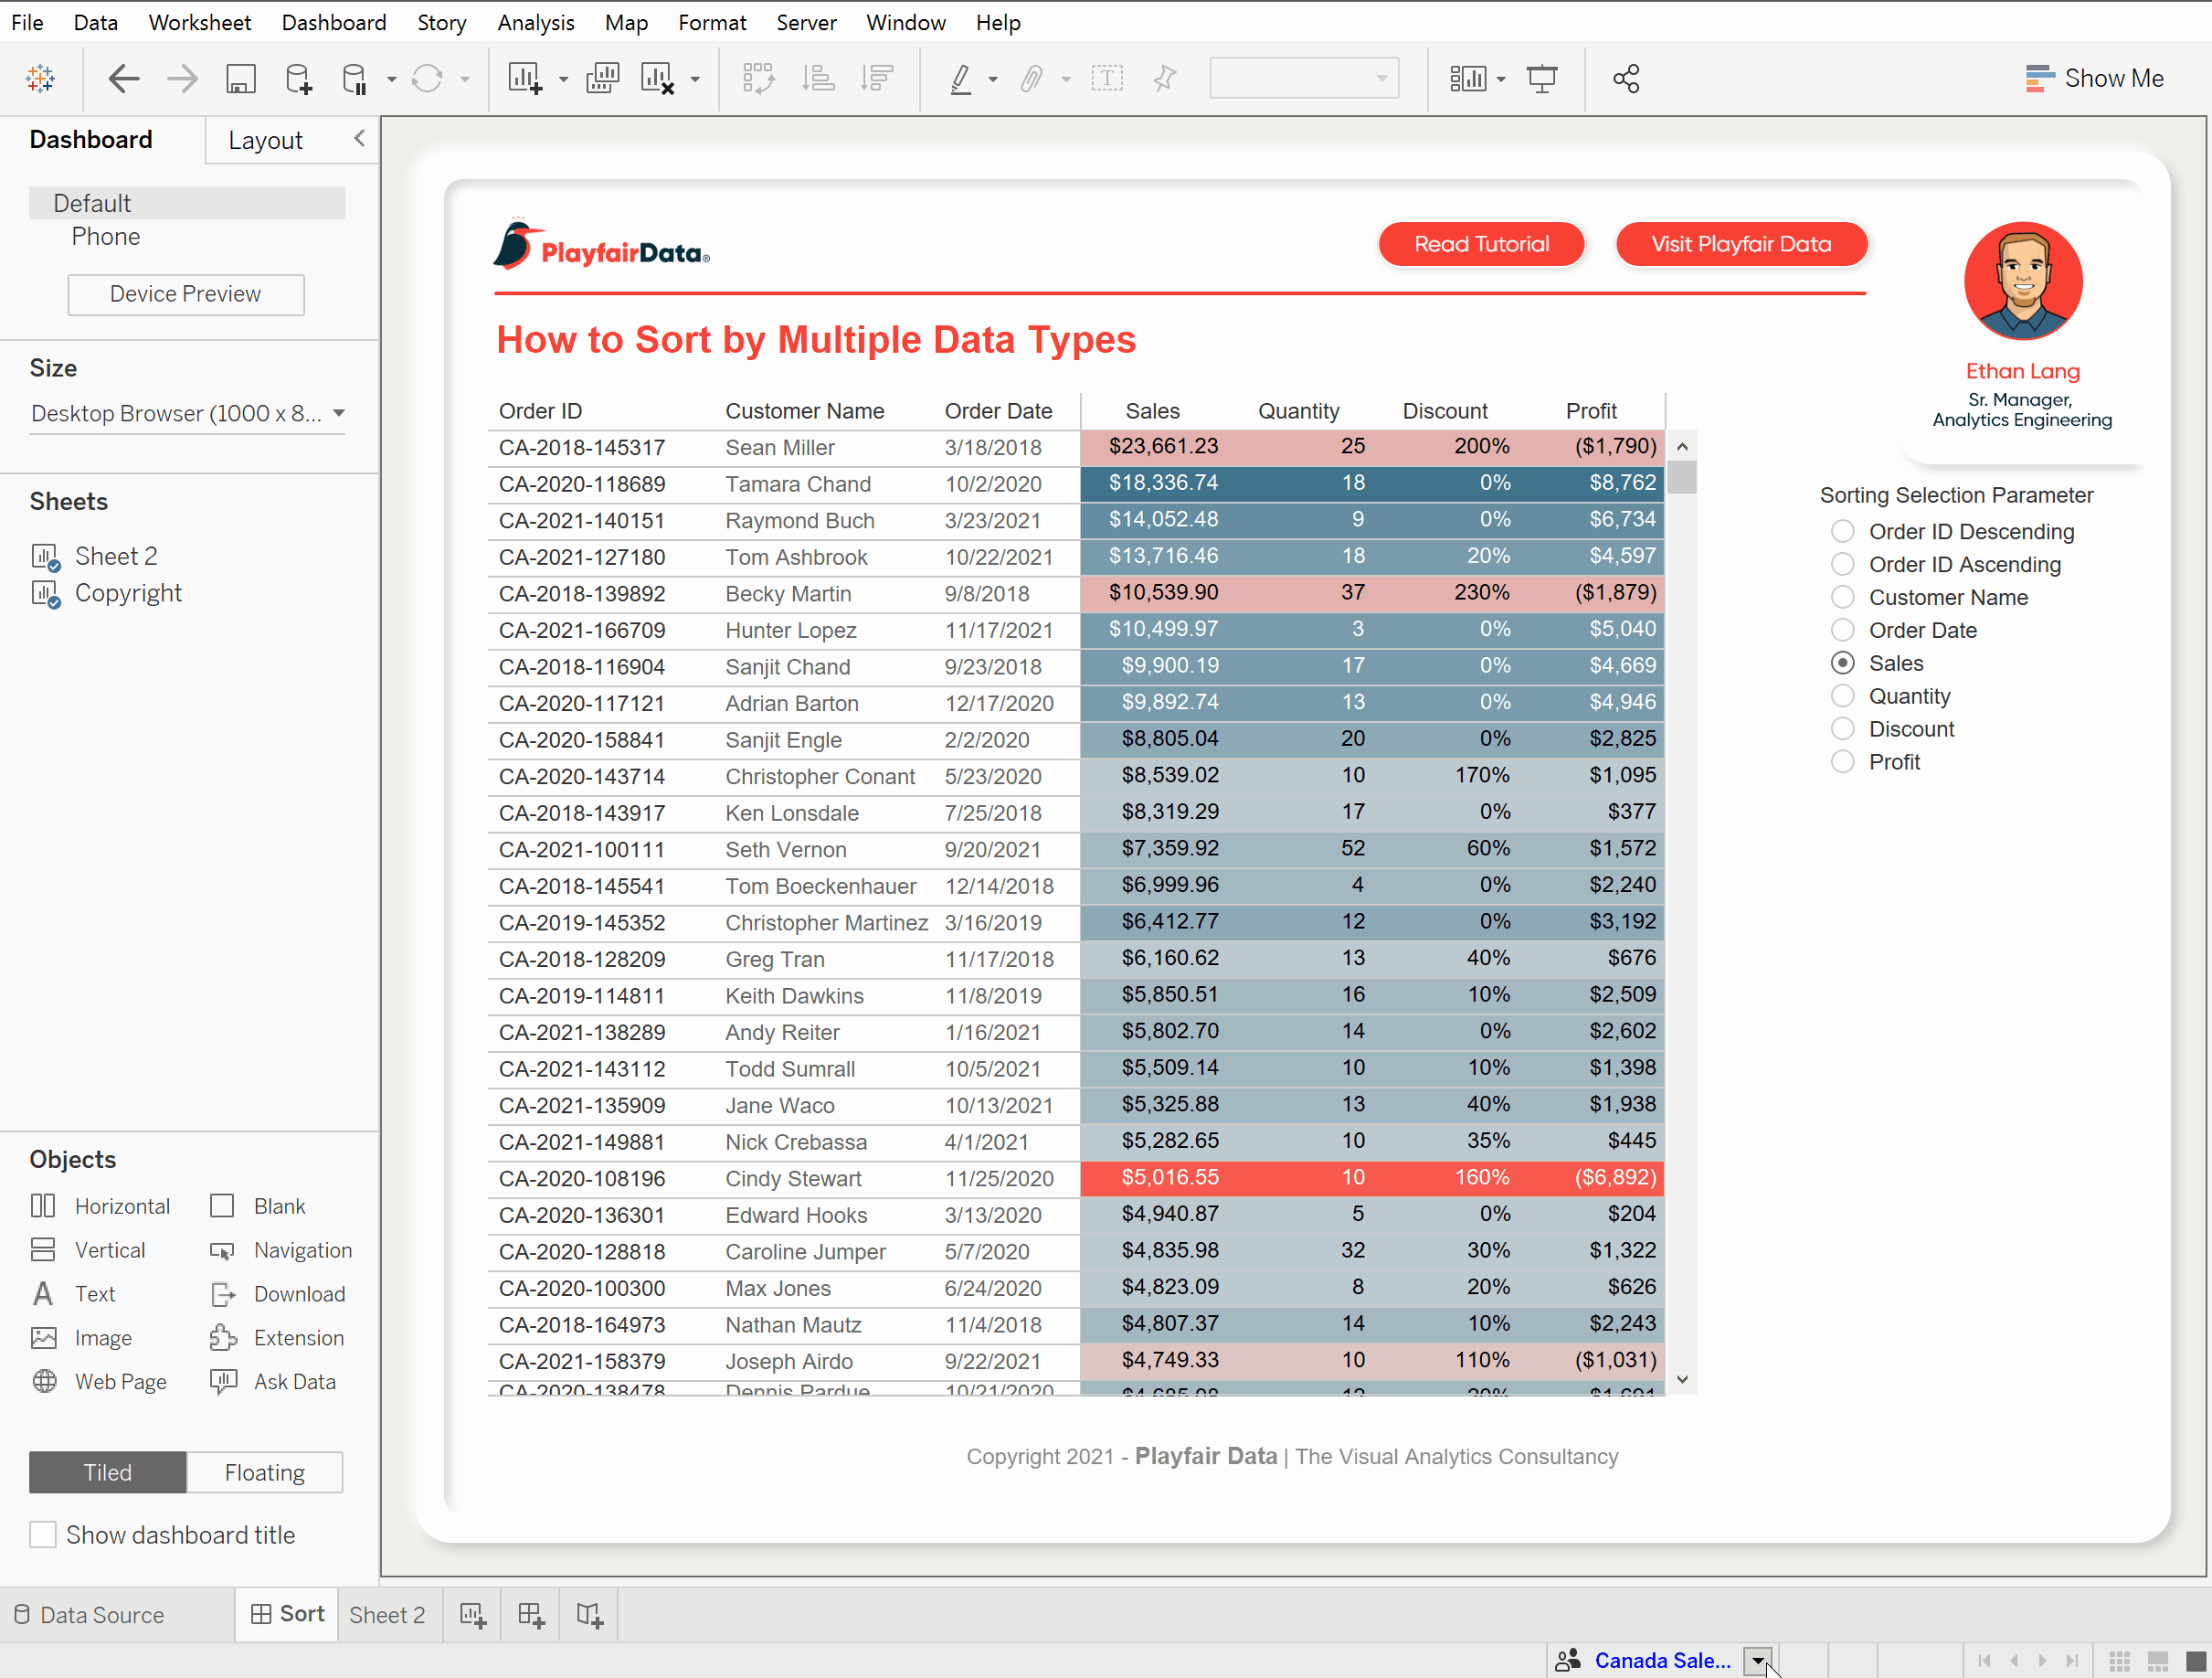 How to Implement Column-Level Security in Tableau